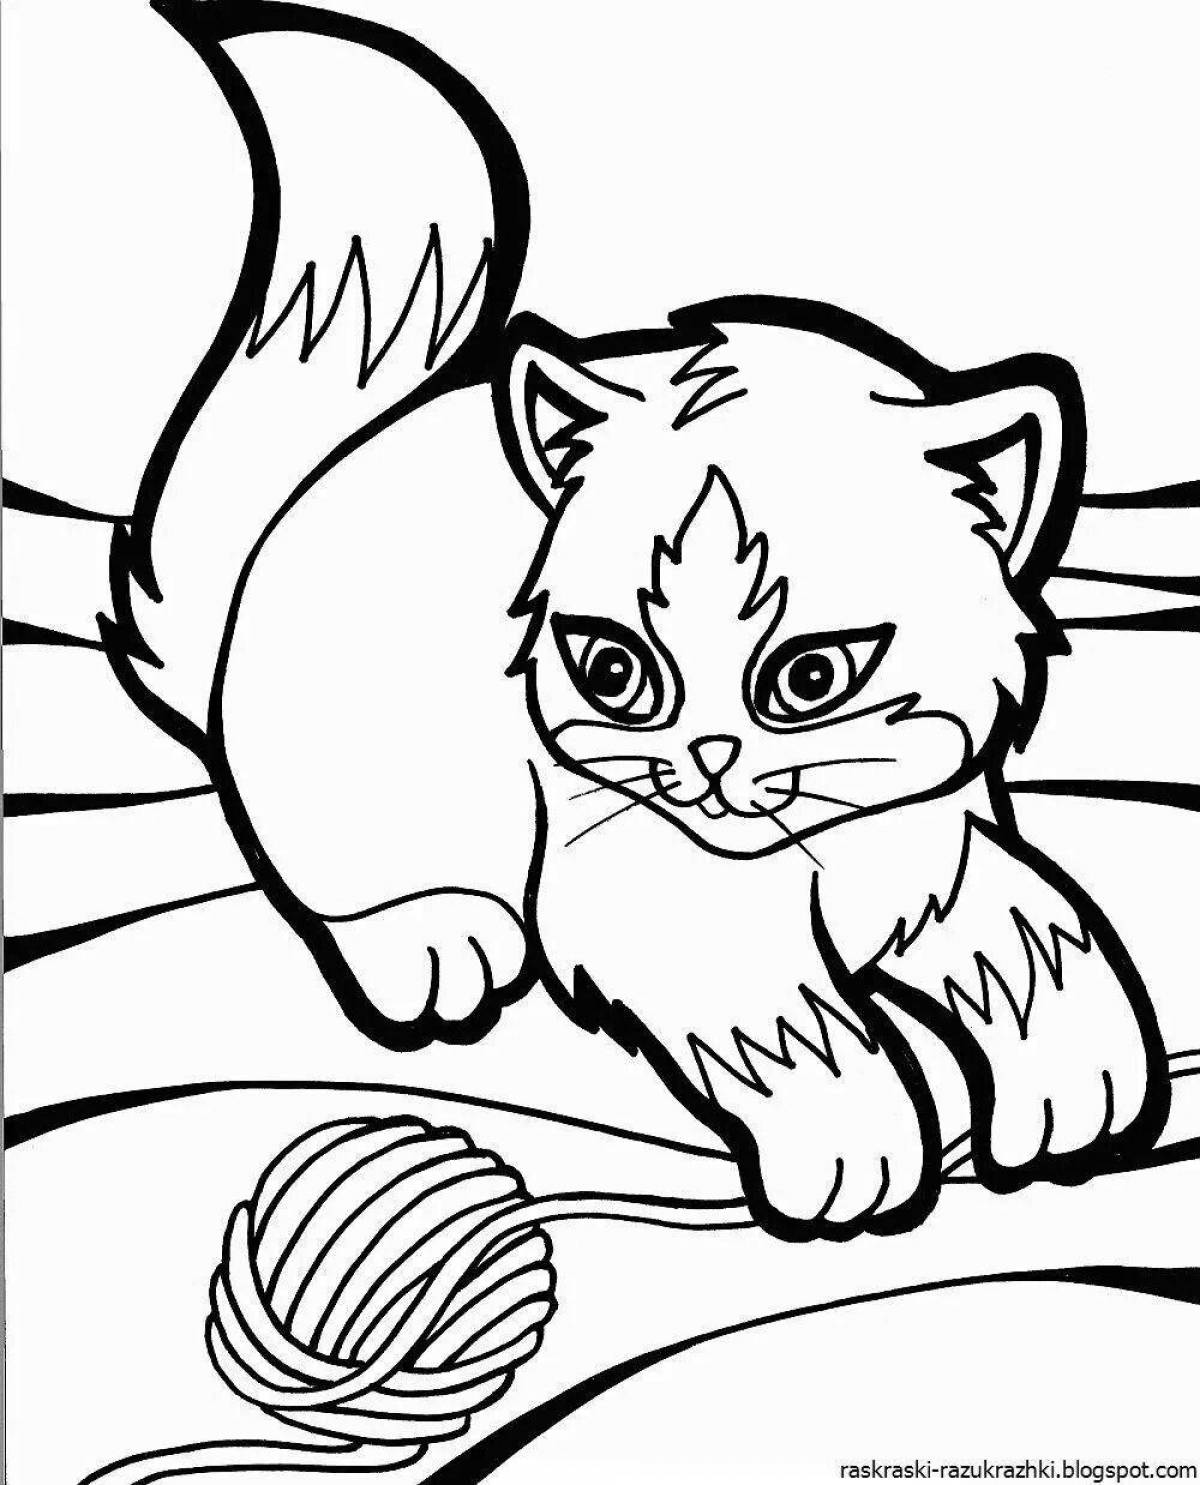 Coloring book witty kittens for children 6-7 years old